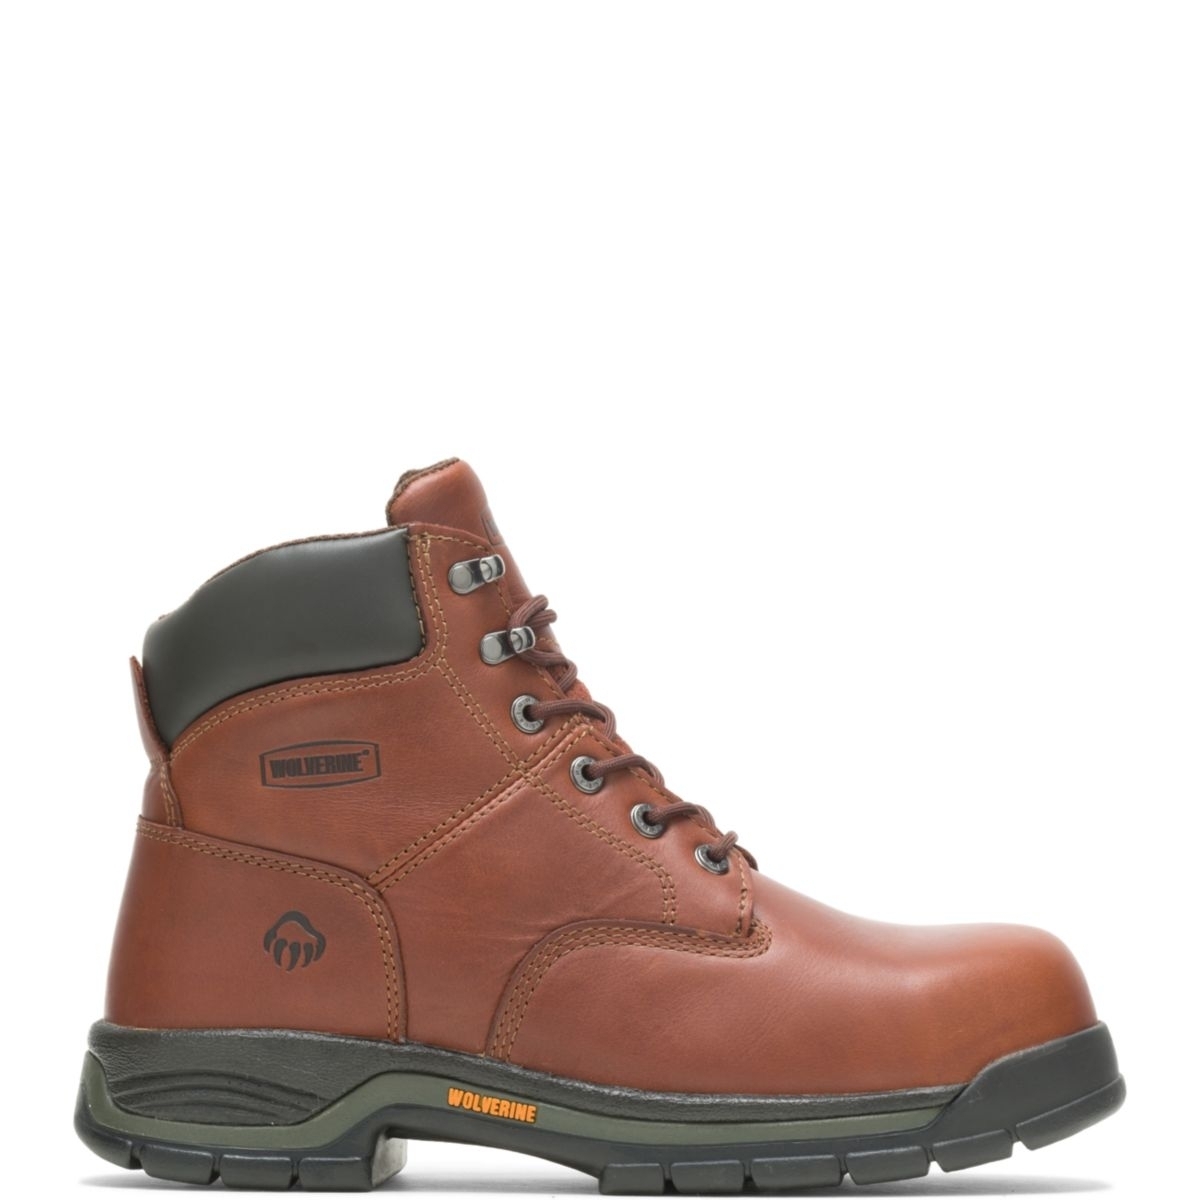 WOLVERINE Men's Harrison 6 Lace-Up Steel Toe Work Boot Brown - W04904 BROWN LEATHER - BROWN LEATHER, 11.5-M